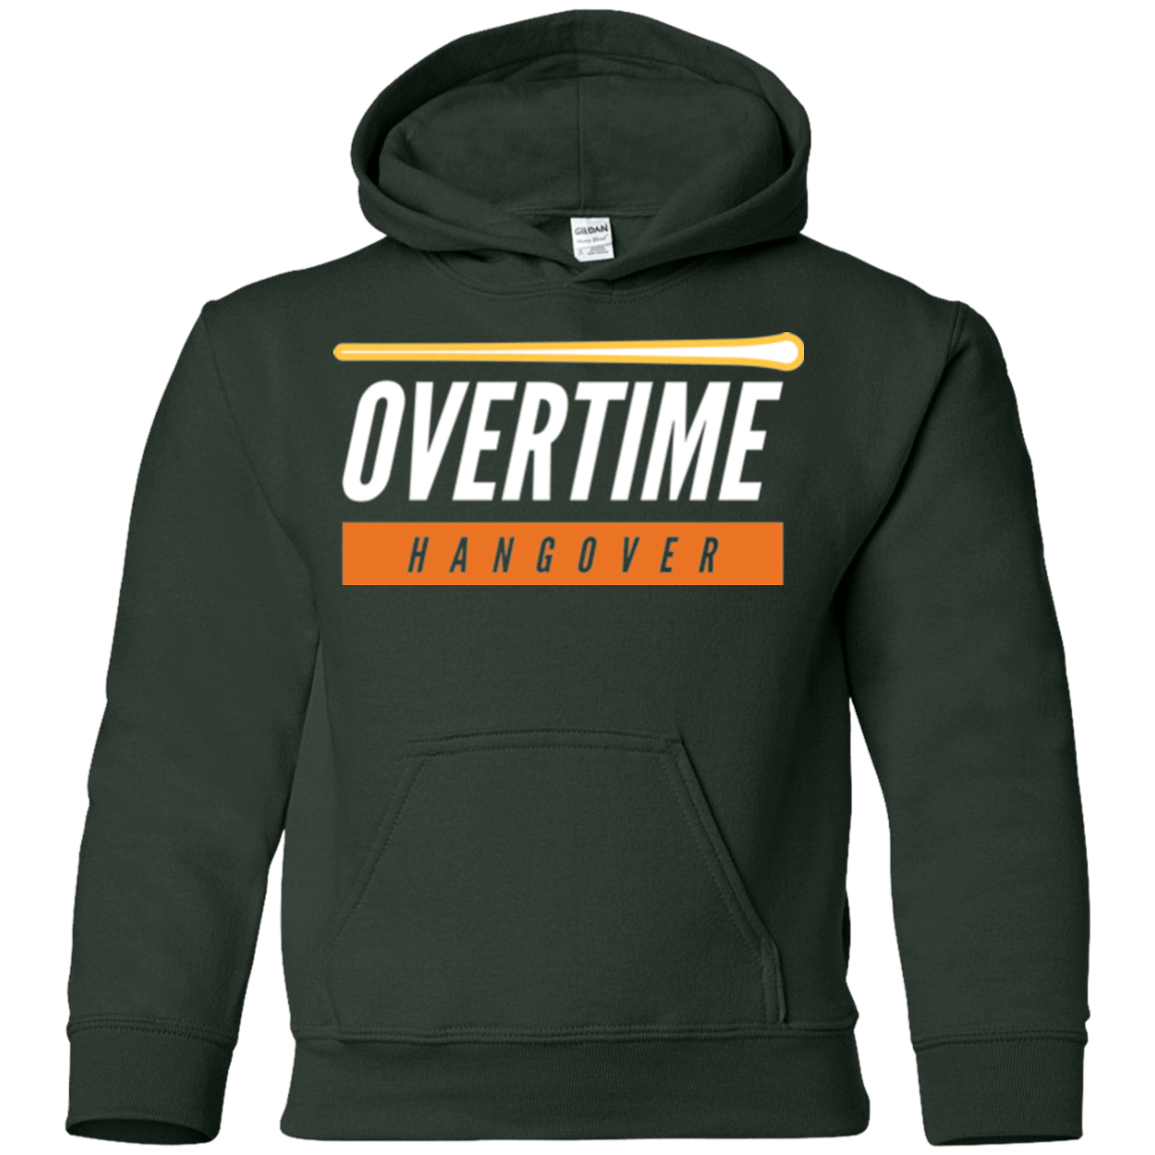 Sweatshirts Forest Green / YS 99 Percent Hangover Youth Hoodie